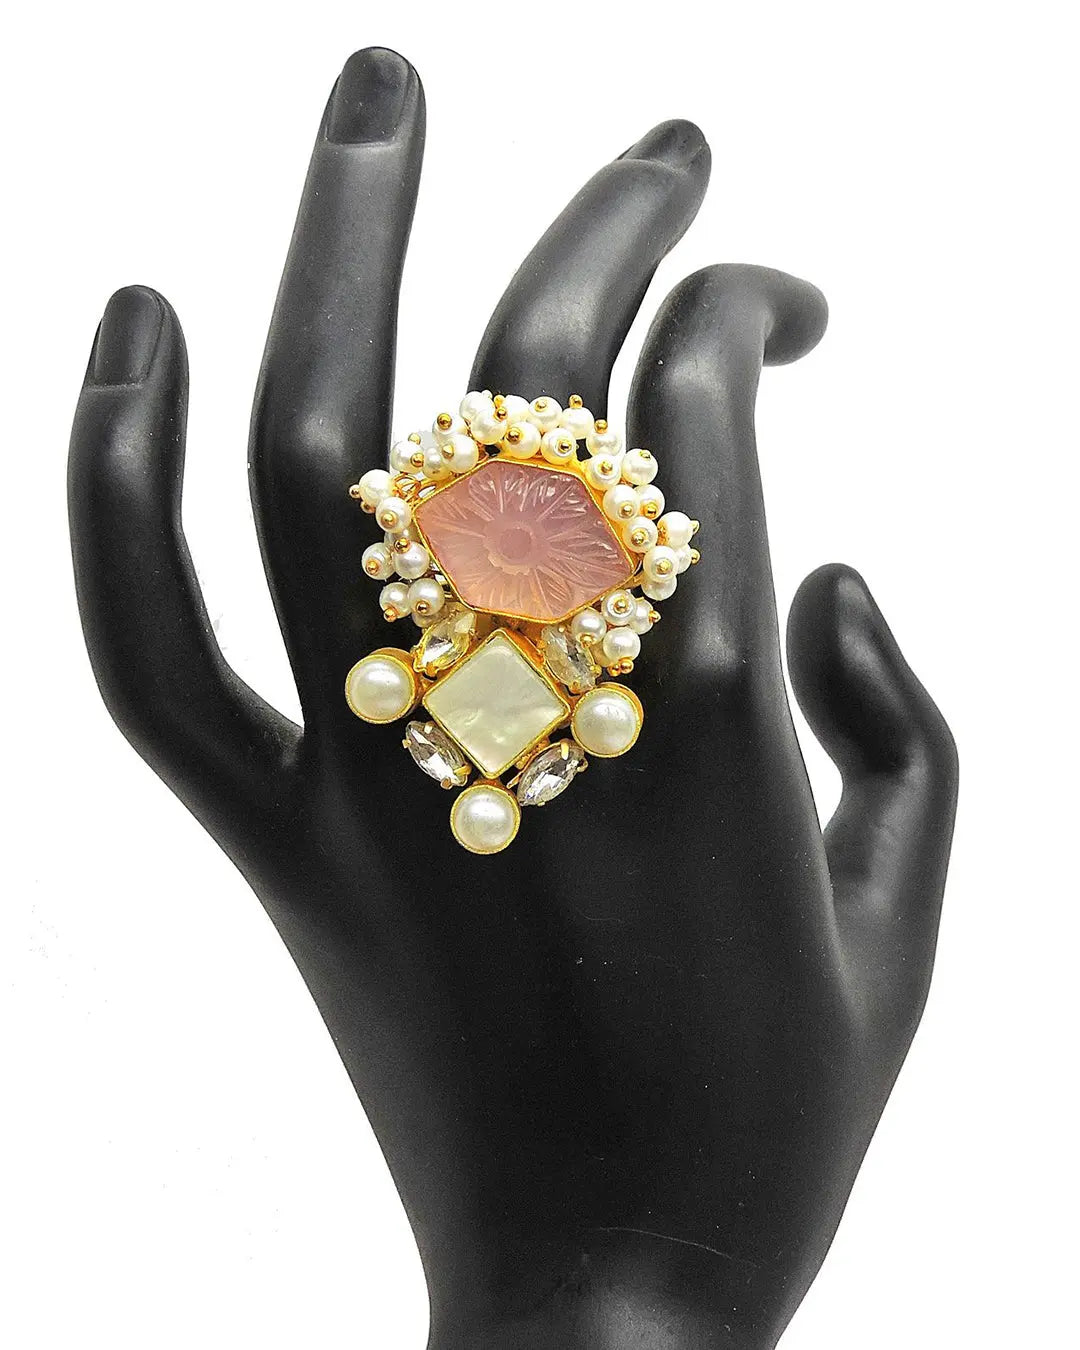 Gianna Ring- Handcrafted Jewellery from Dori